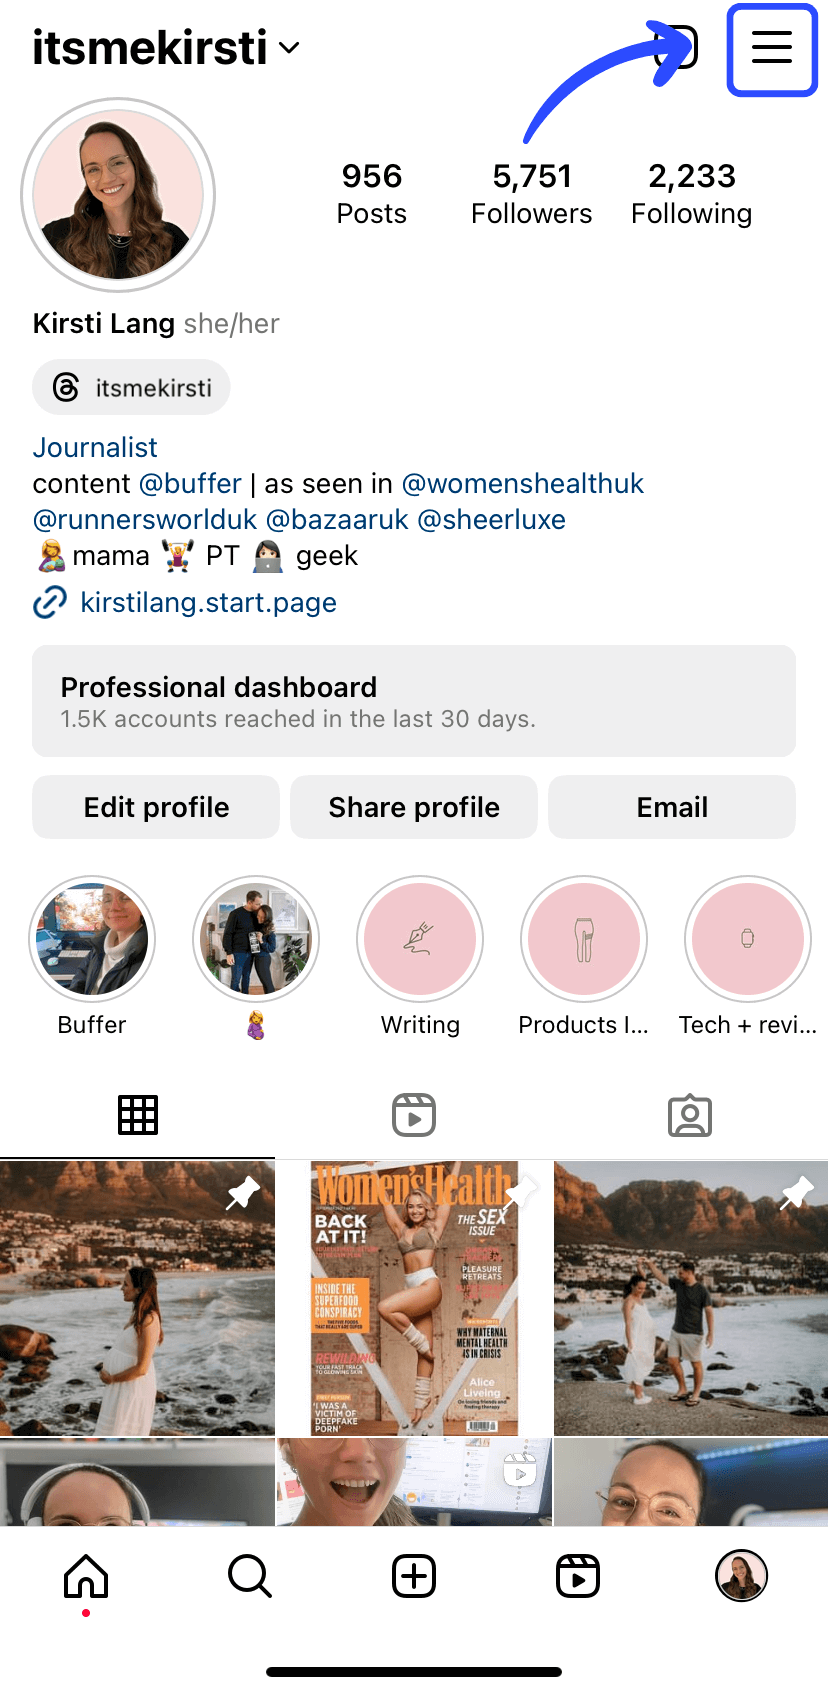 HOW TO GET VERIFIED ON INSTAGRAM IN 2024 